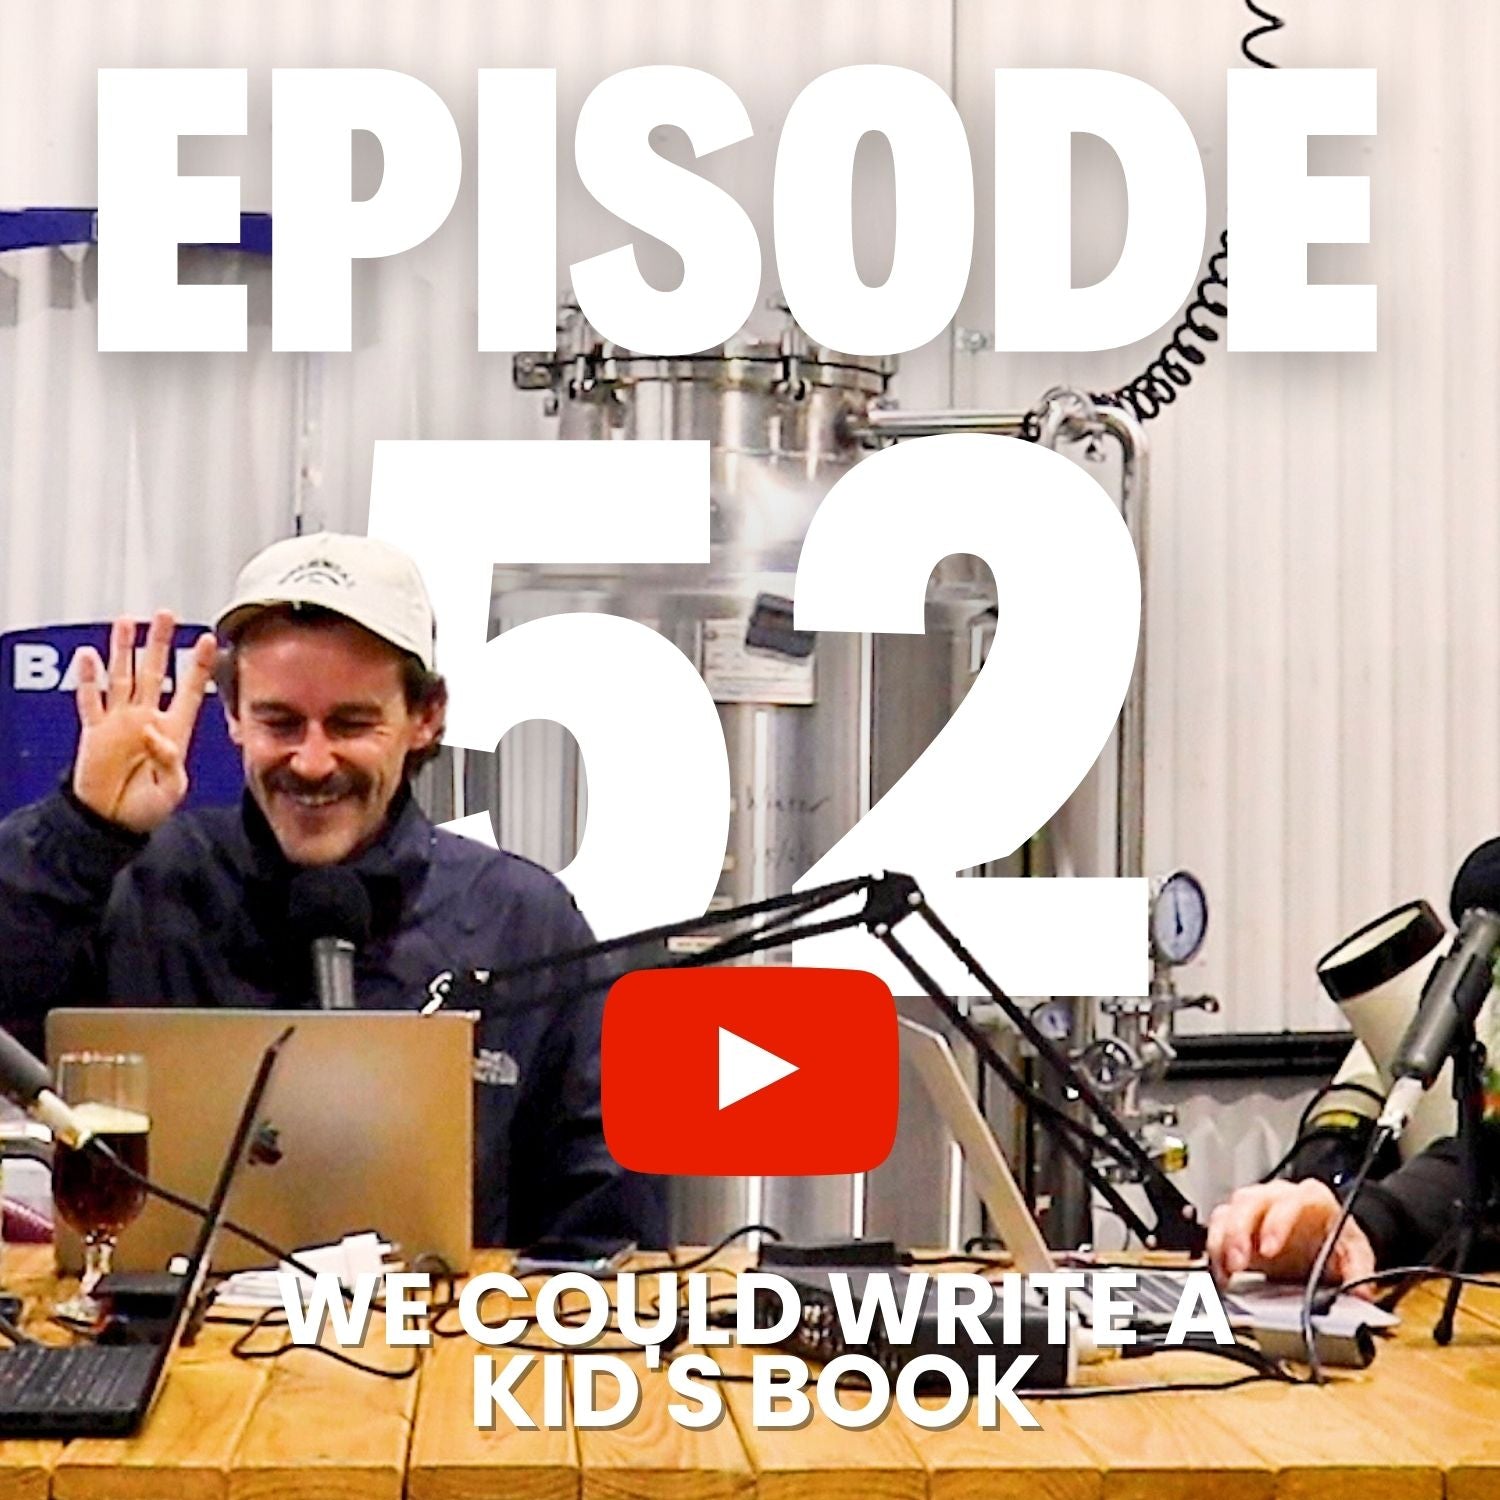 Episode 52 - We Could Write a Kid's Book